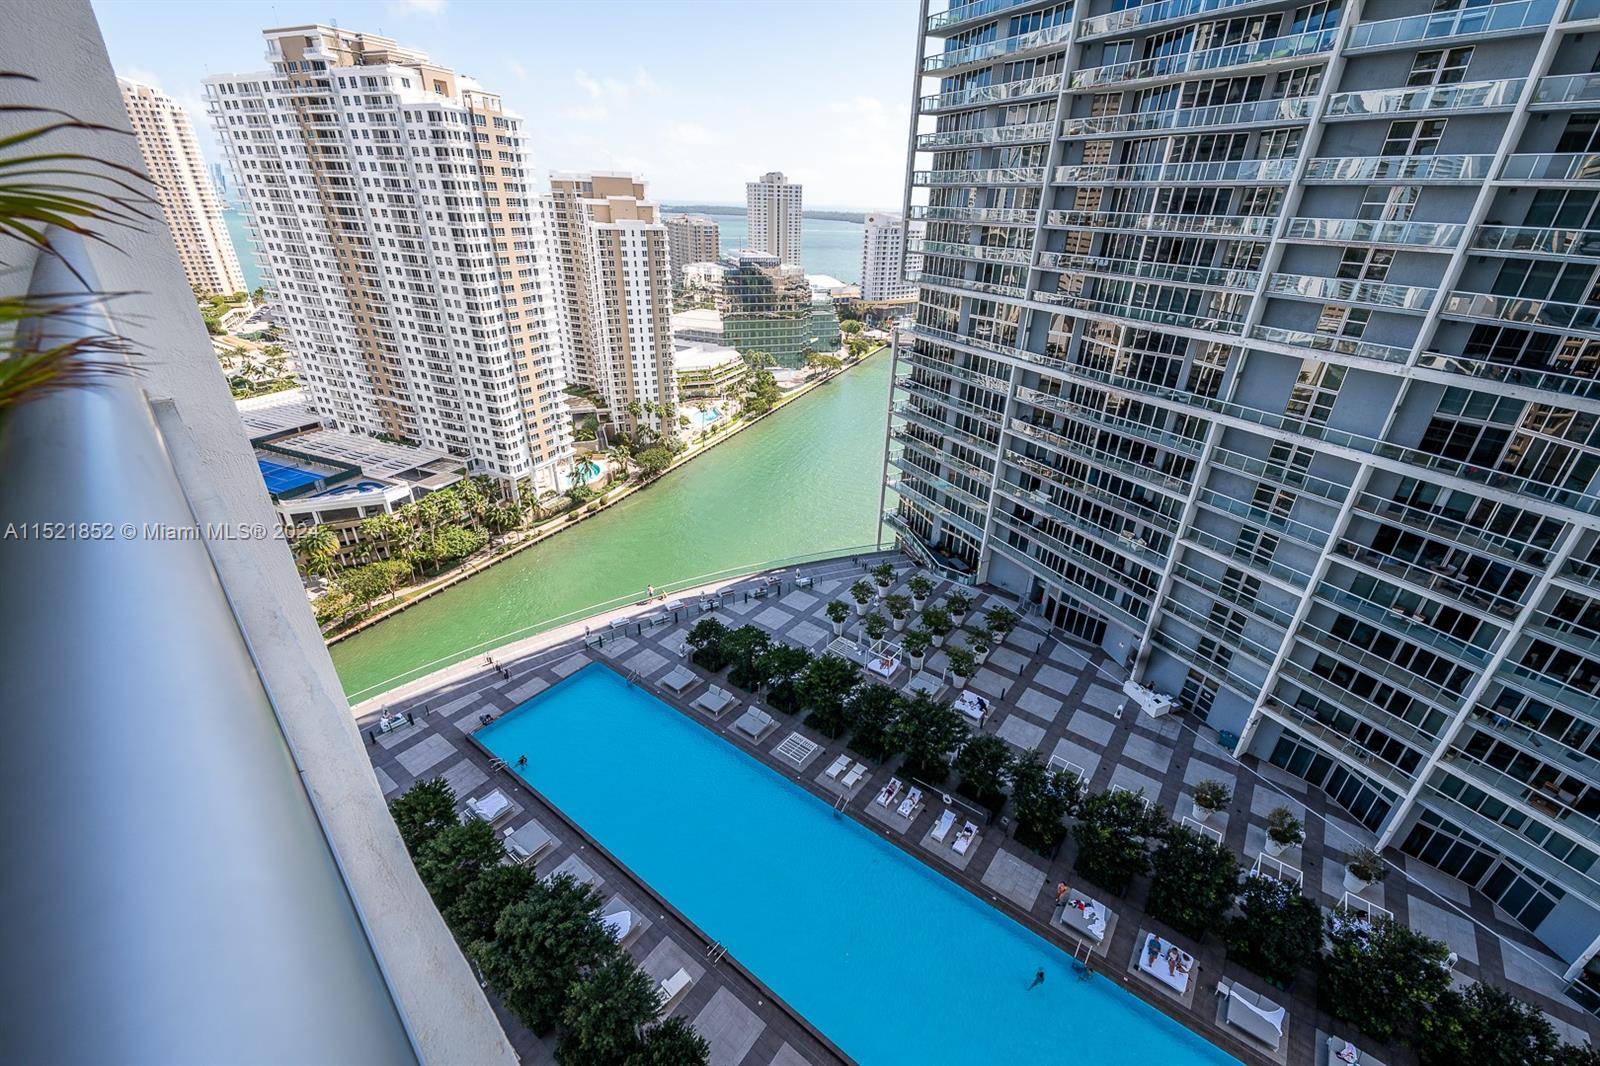 Stunning 2 bed, 2 bath condo nestled on the 25th floor of the prestigious Icon building in the heart of Brickell.